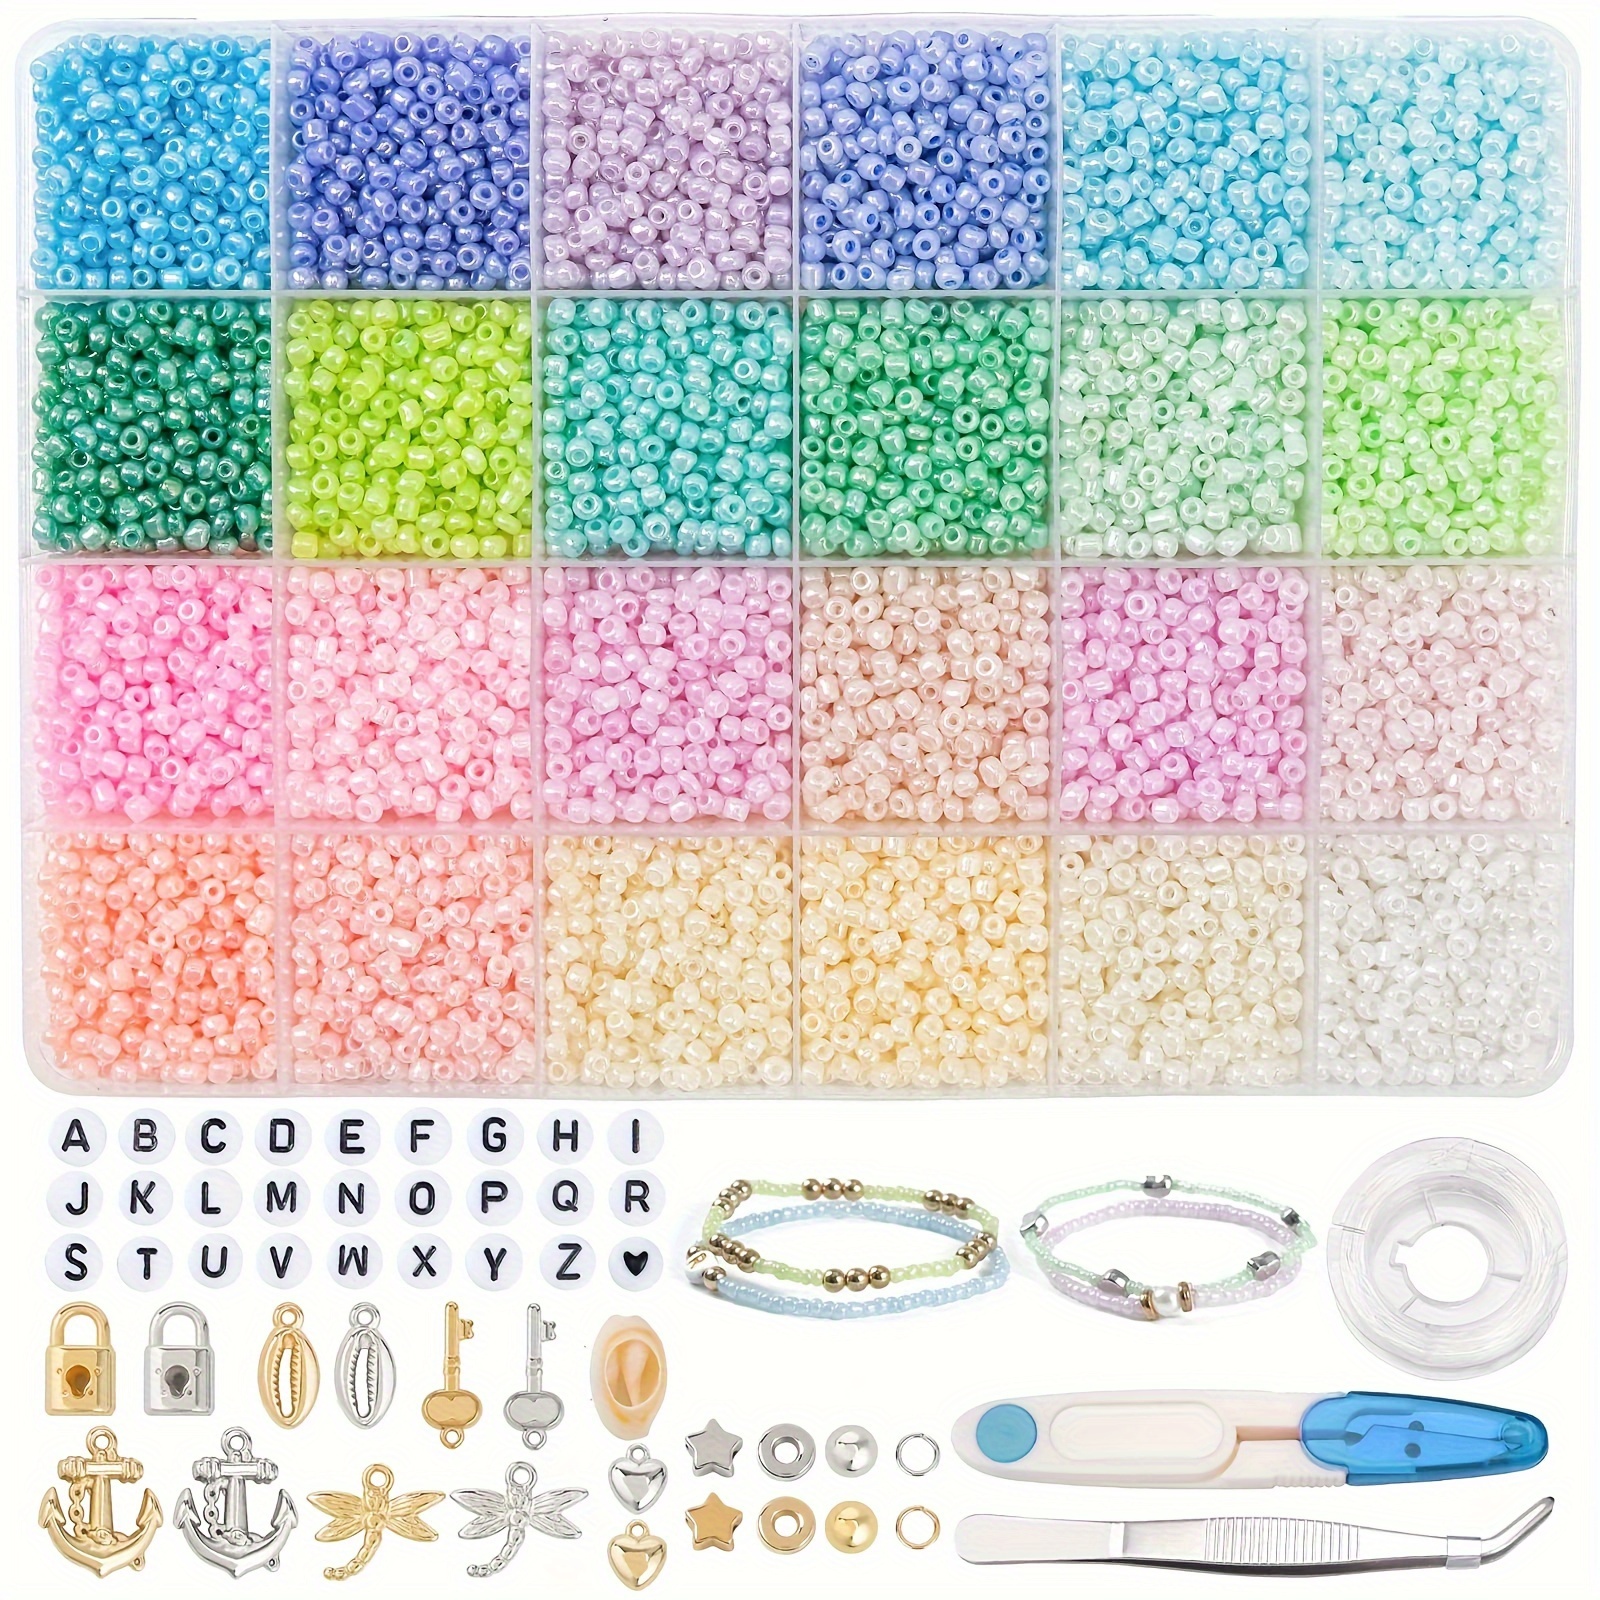 

Boho Glass Bead Kit With Acrylic Letter Beads - 12000pcs 3mm Round Macaron Matte Beads For Jewelry Making, Bracelet Diy Craft, Includes 300 Alphabet Beads & Accessories With Scissors & Tweezers